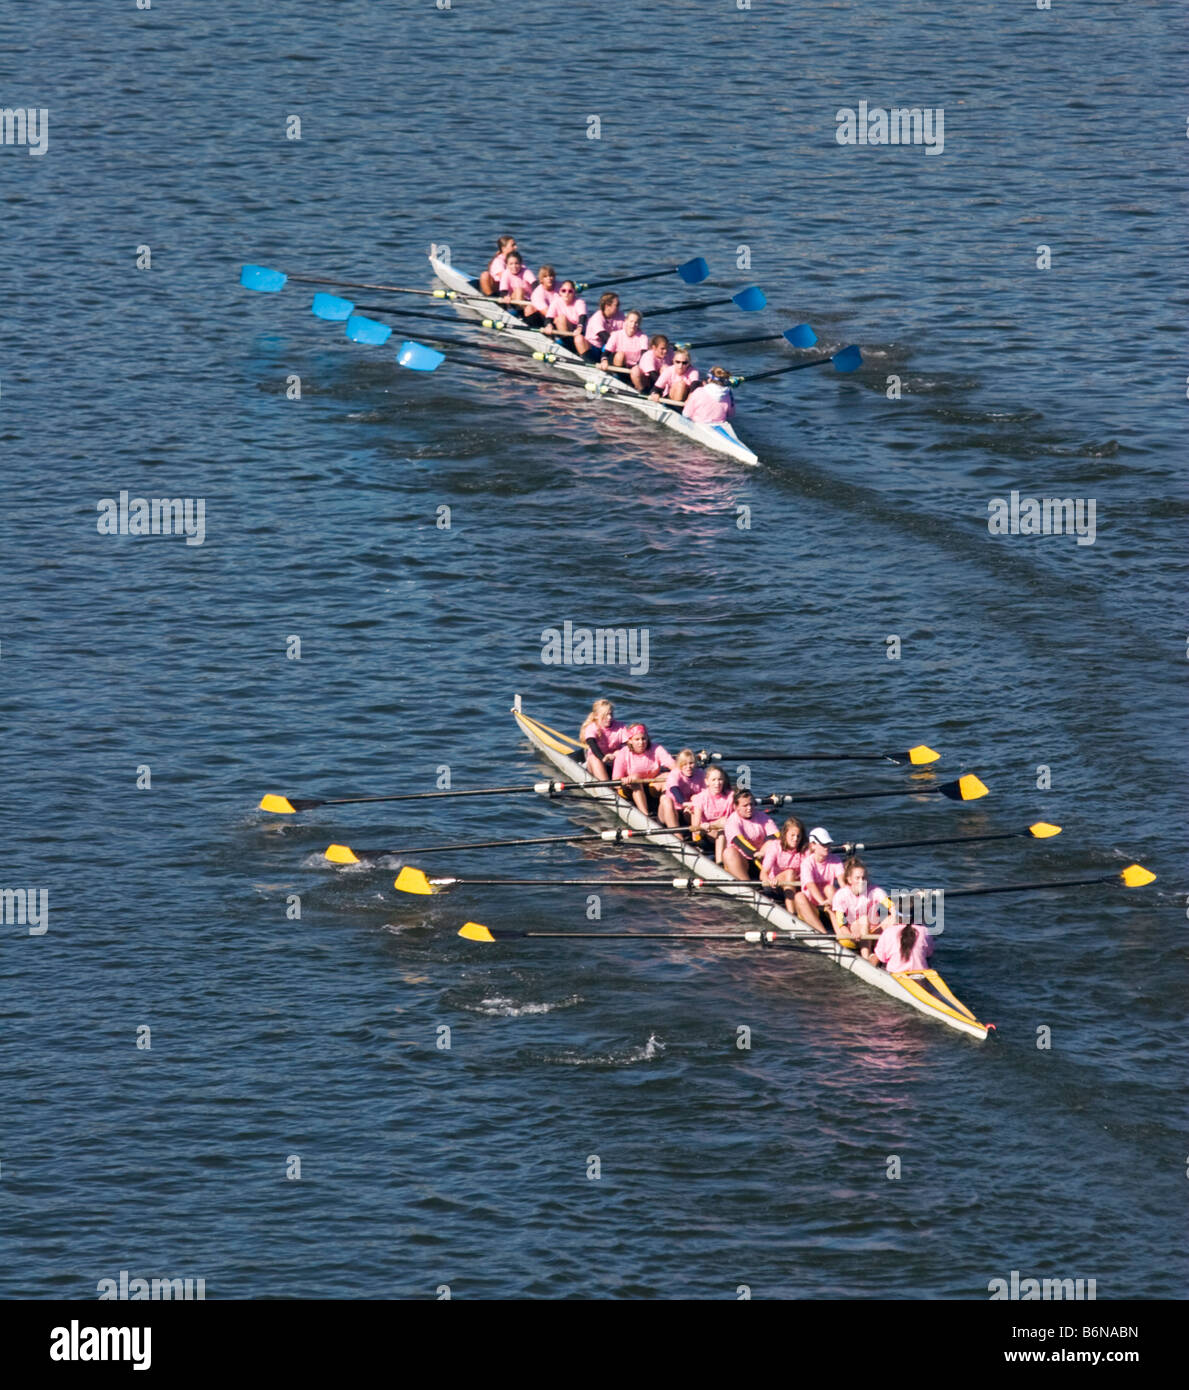 Donne scullers racing sul fiume Tennessee a Chattanooga Foto Stock